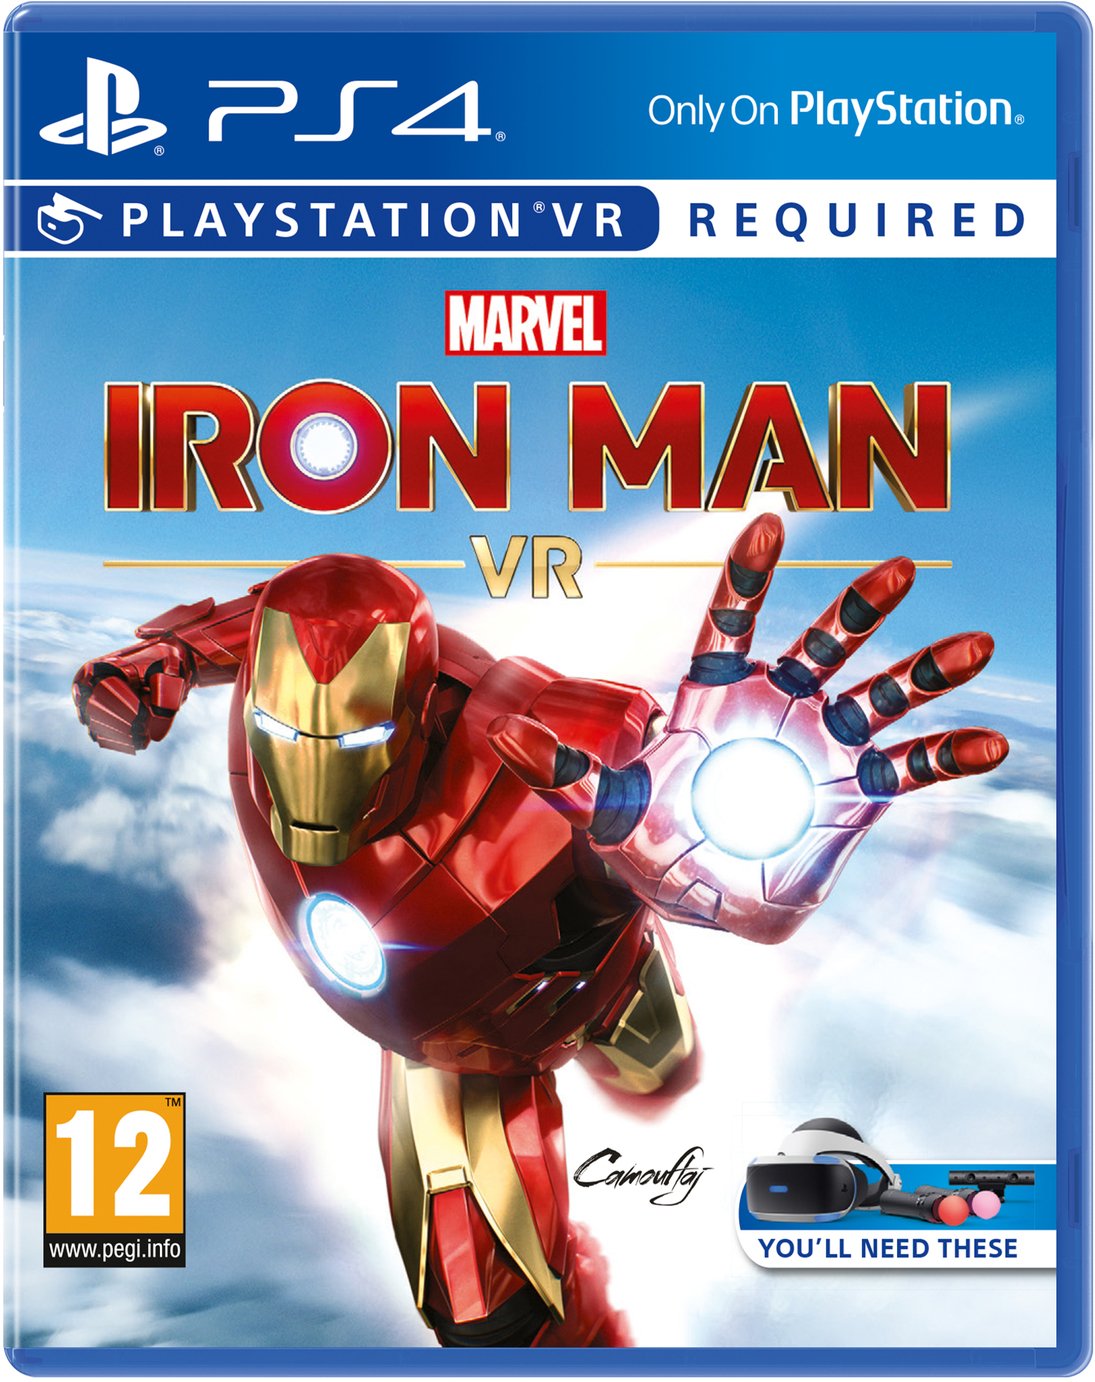 Marvel's Iron Man VR PS VR Game (PS4) Review